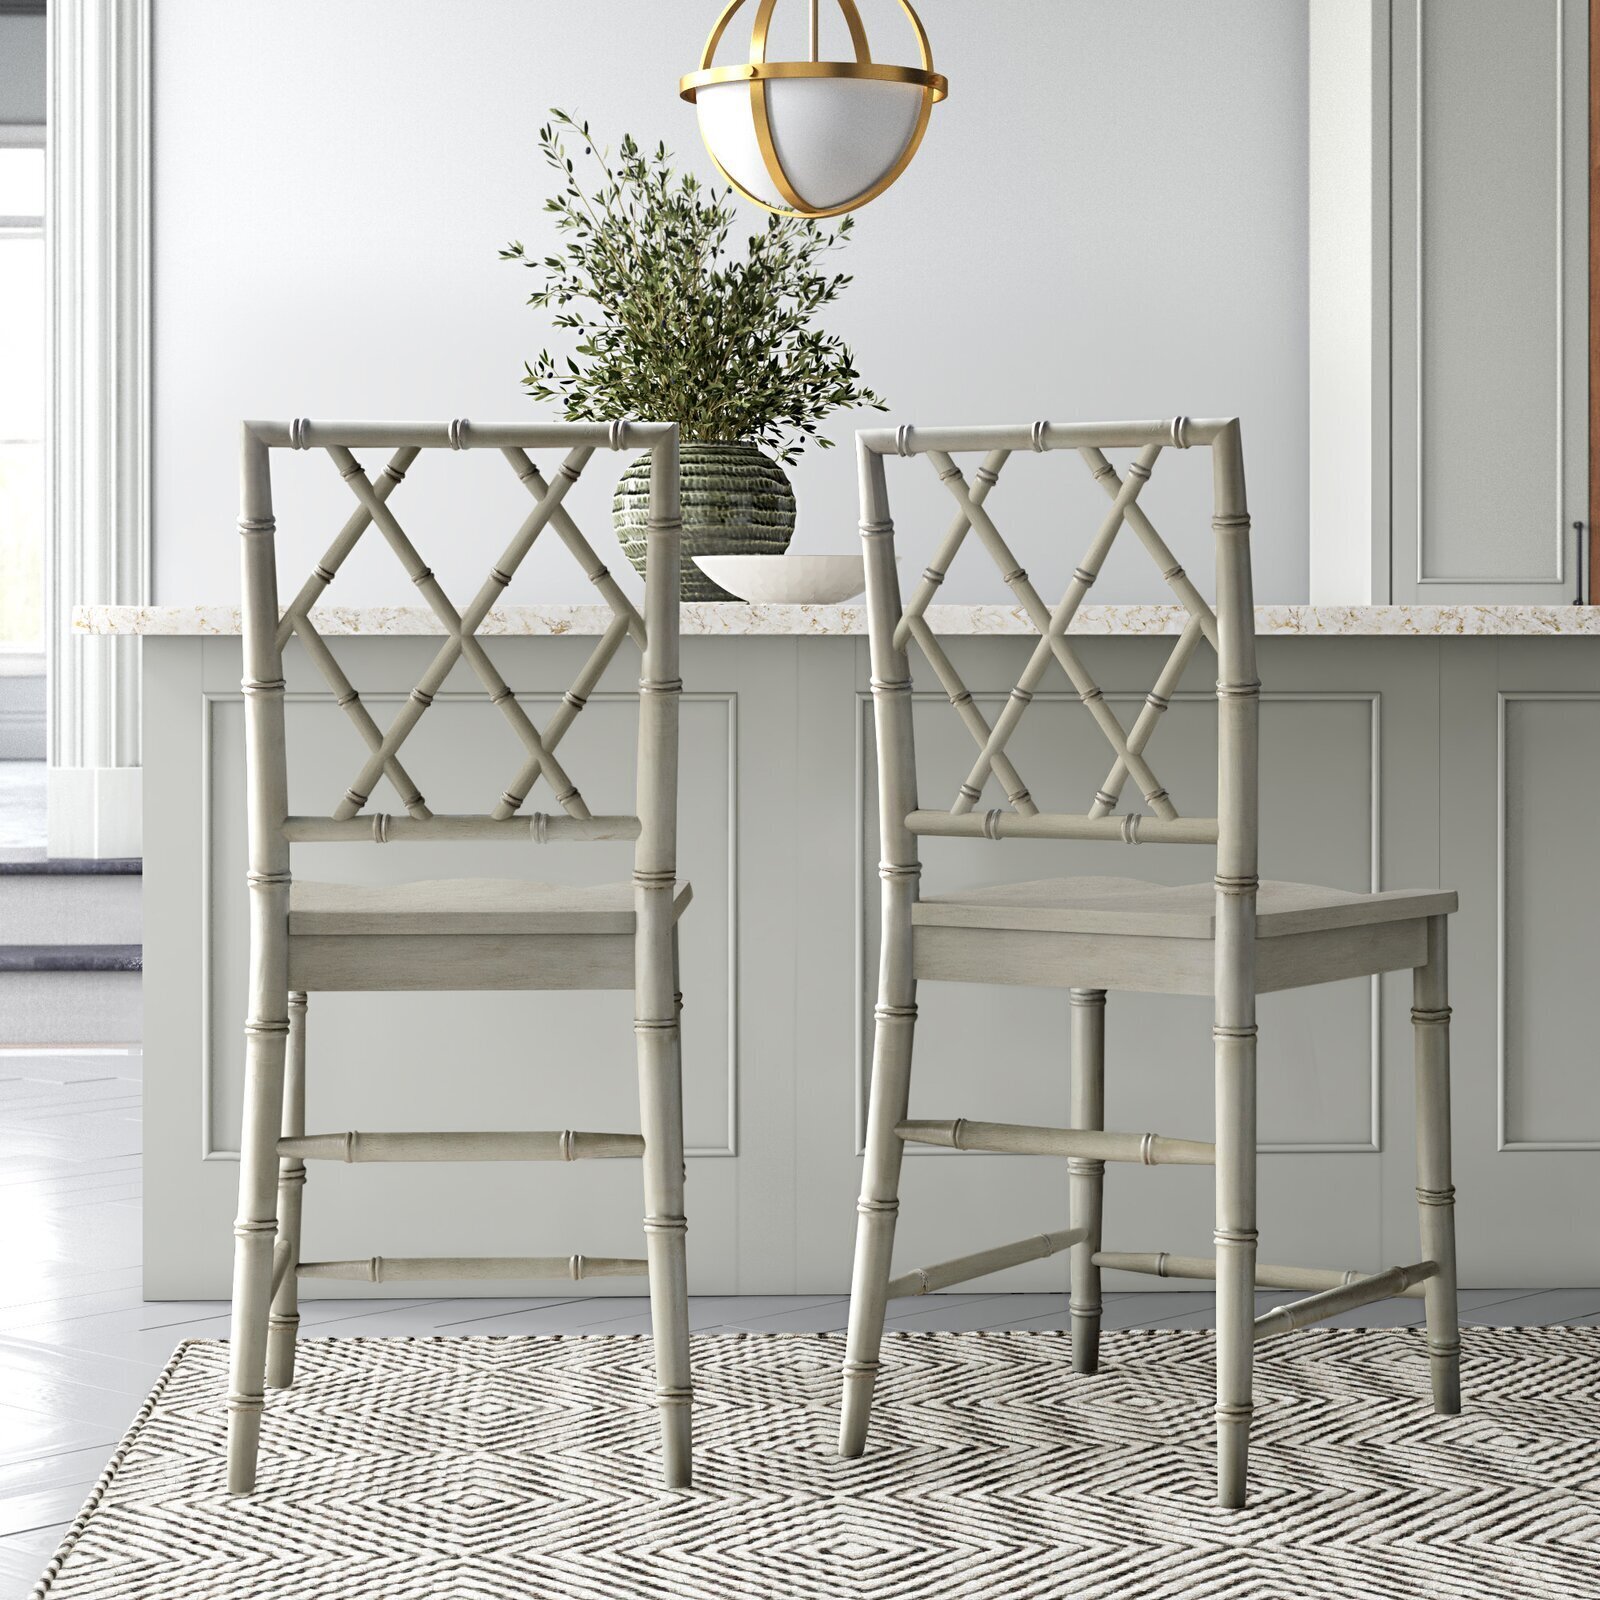 Elegant bamboo style chairs for counters